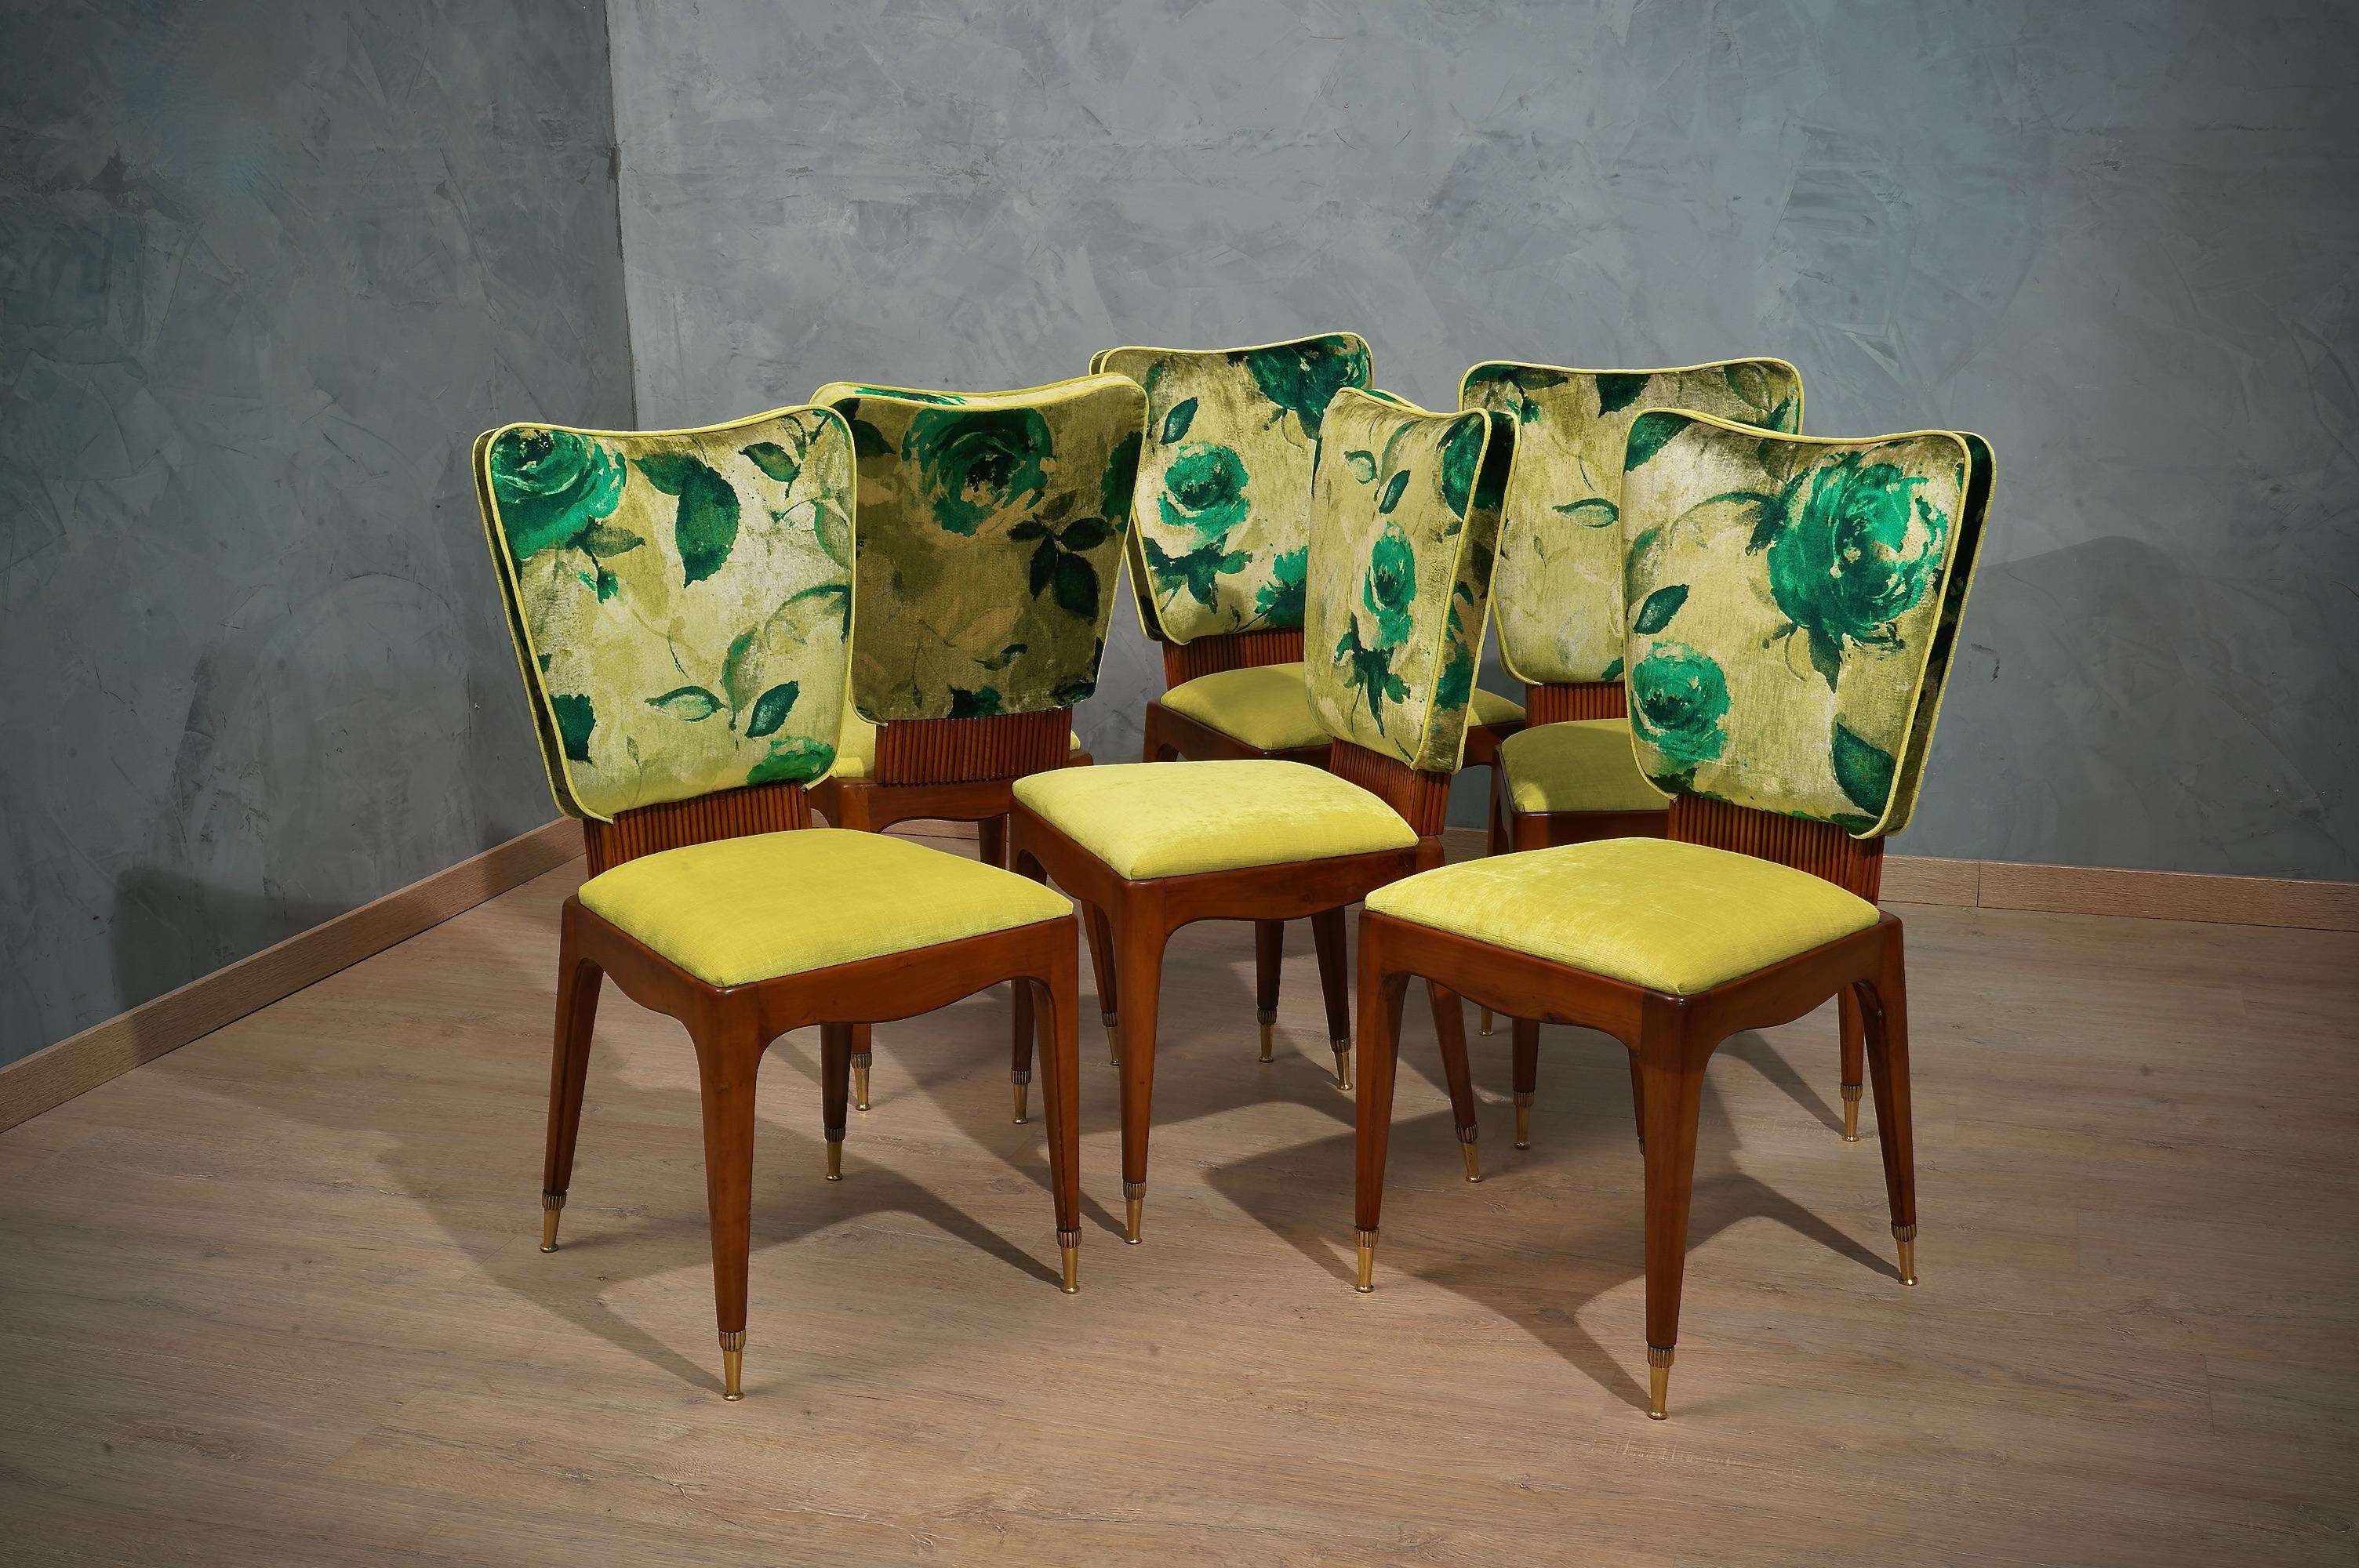 Six fantastic chairs with the unmistakable Italian design by Osvaldo Borsani, with an unmistakable fabric that enhances the shapes of the Italian architect.

The chairs are in cherry wood and have a very special design. A very large seat and a very